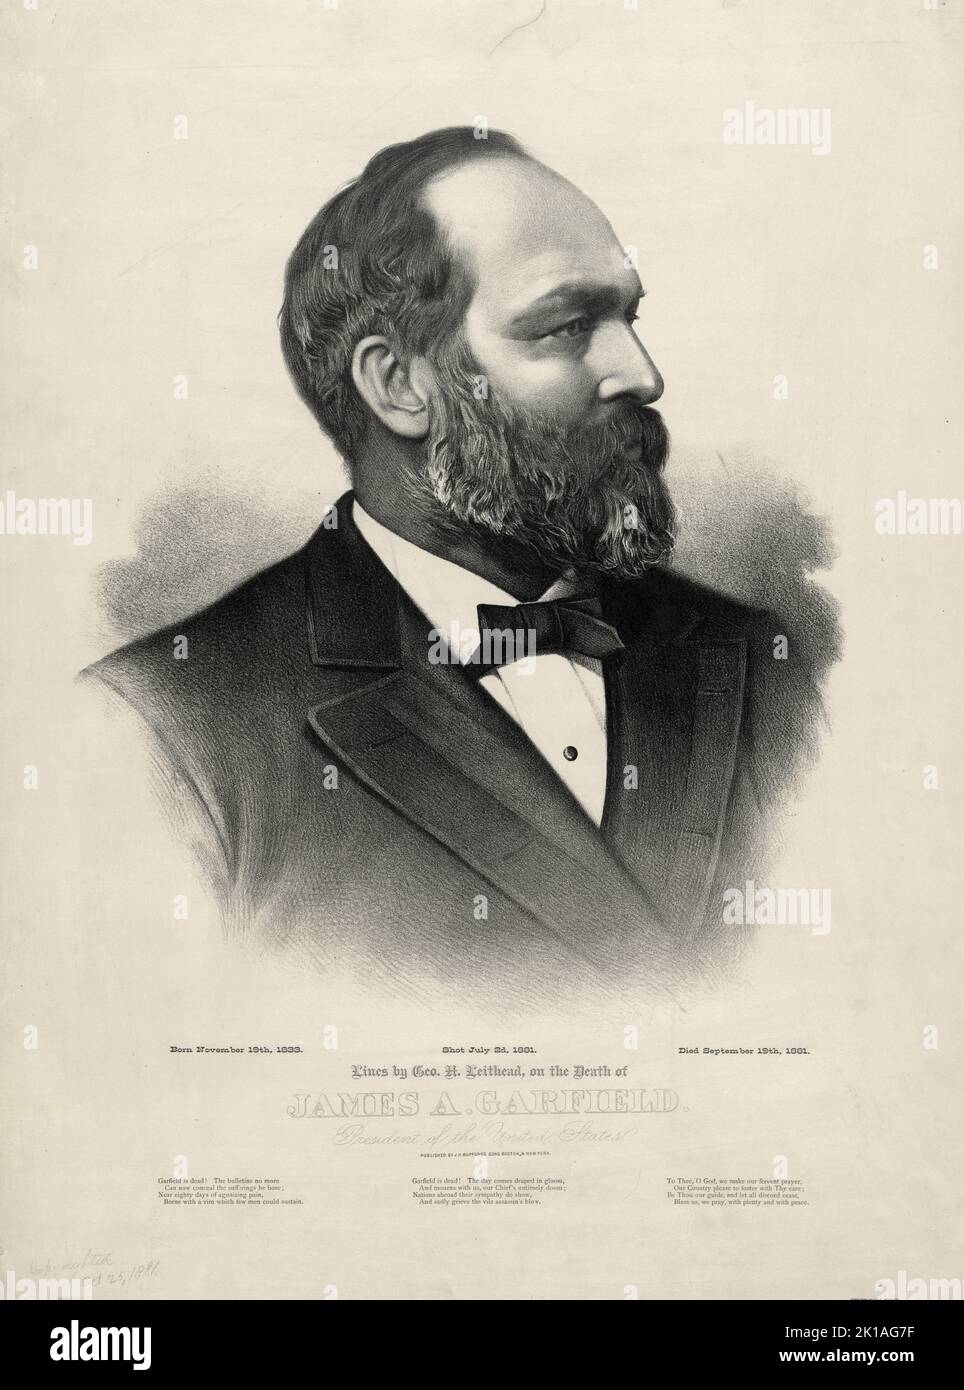 A portrait of US President James Garfield. Garfield was the 20th president of the USA, and the second to be assassinated. Stock Photo